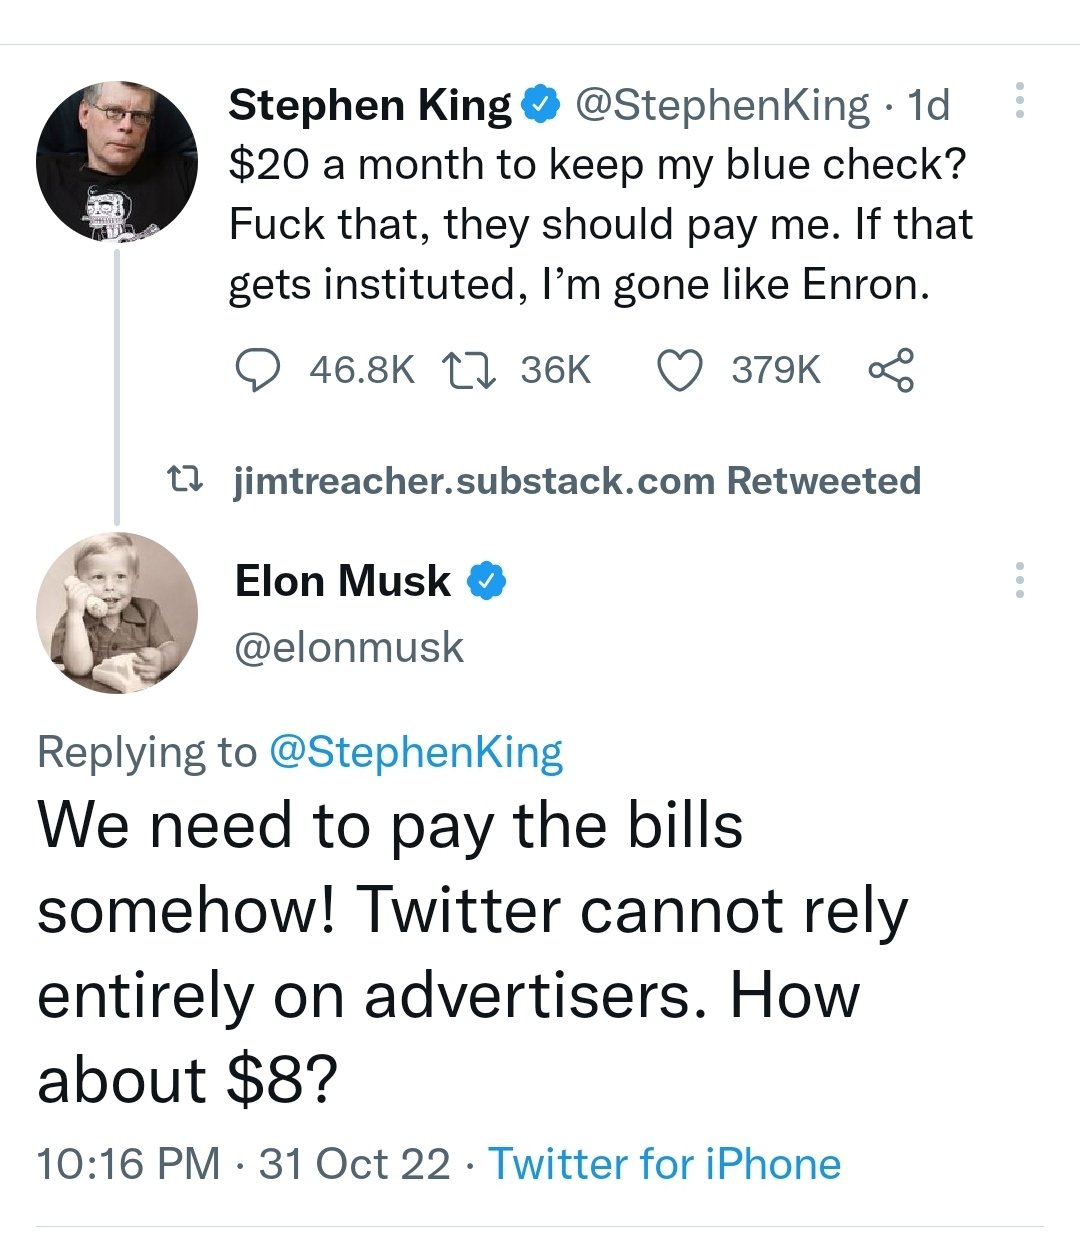 Elon Musk and Stephen King negotiatng the price of Twitter verification in a Twitter exchange